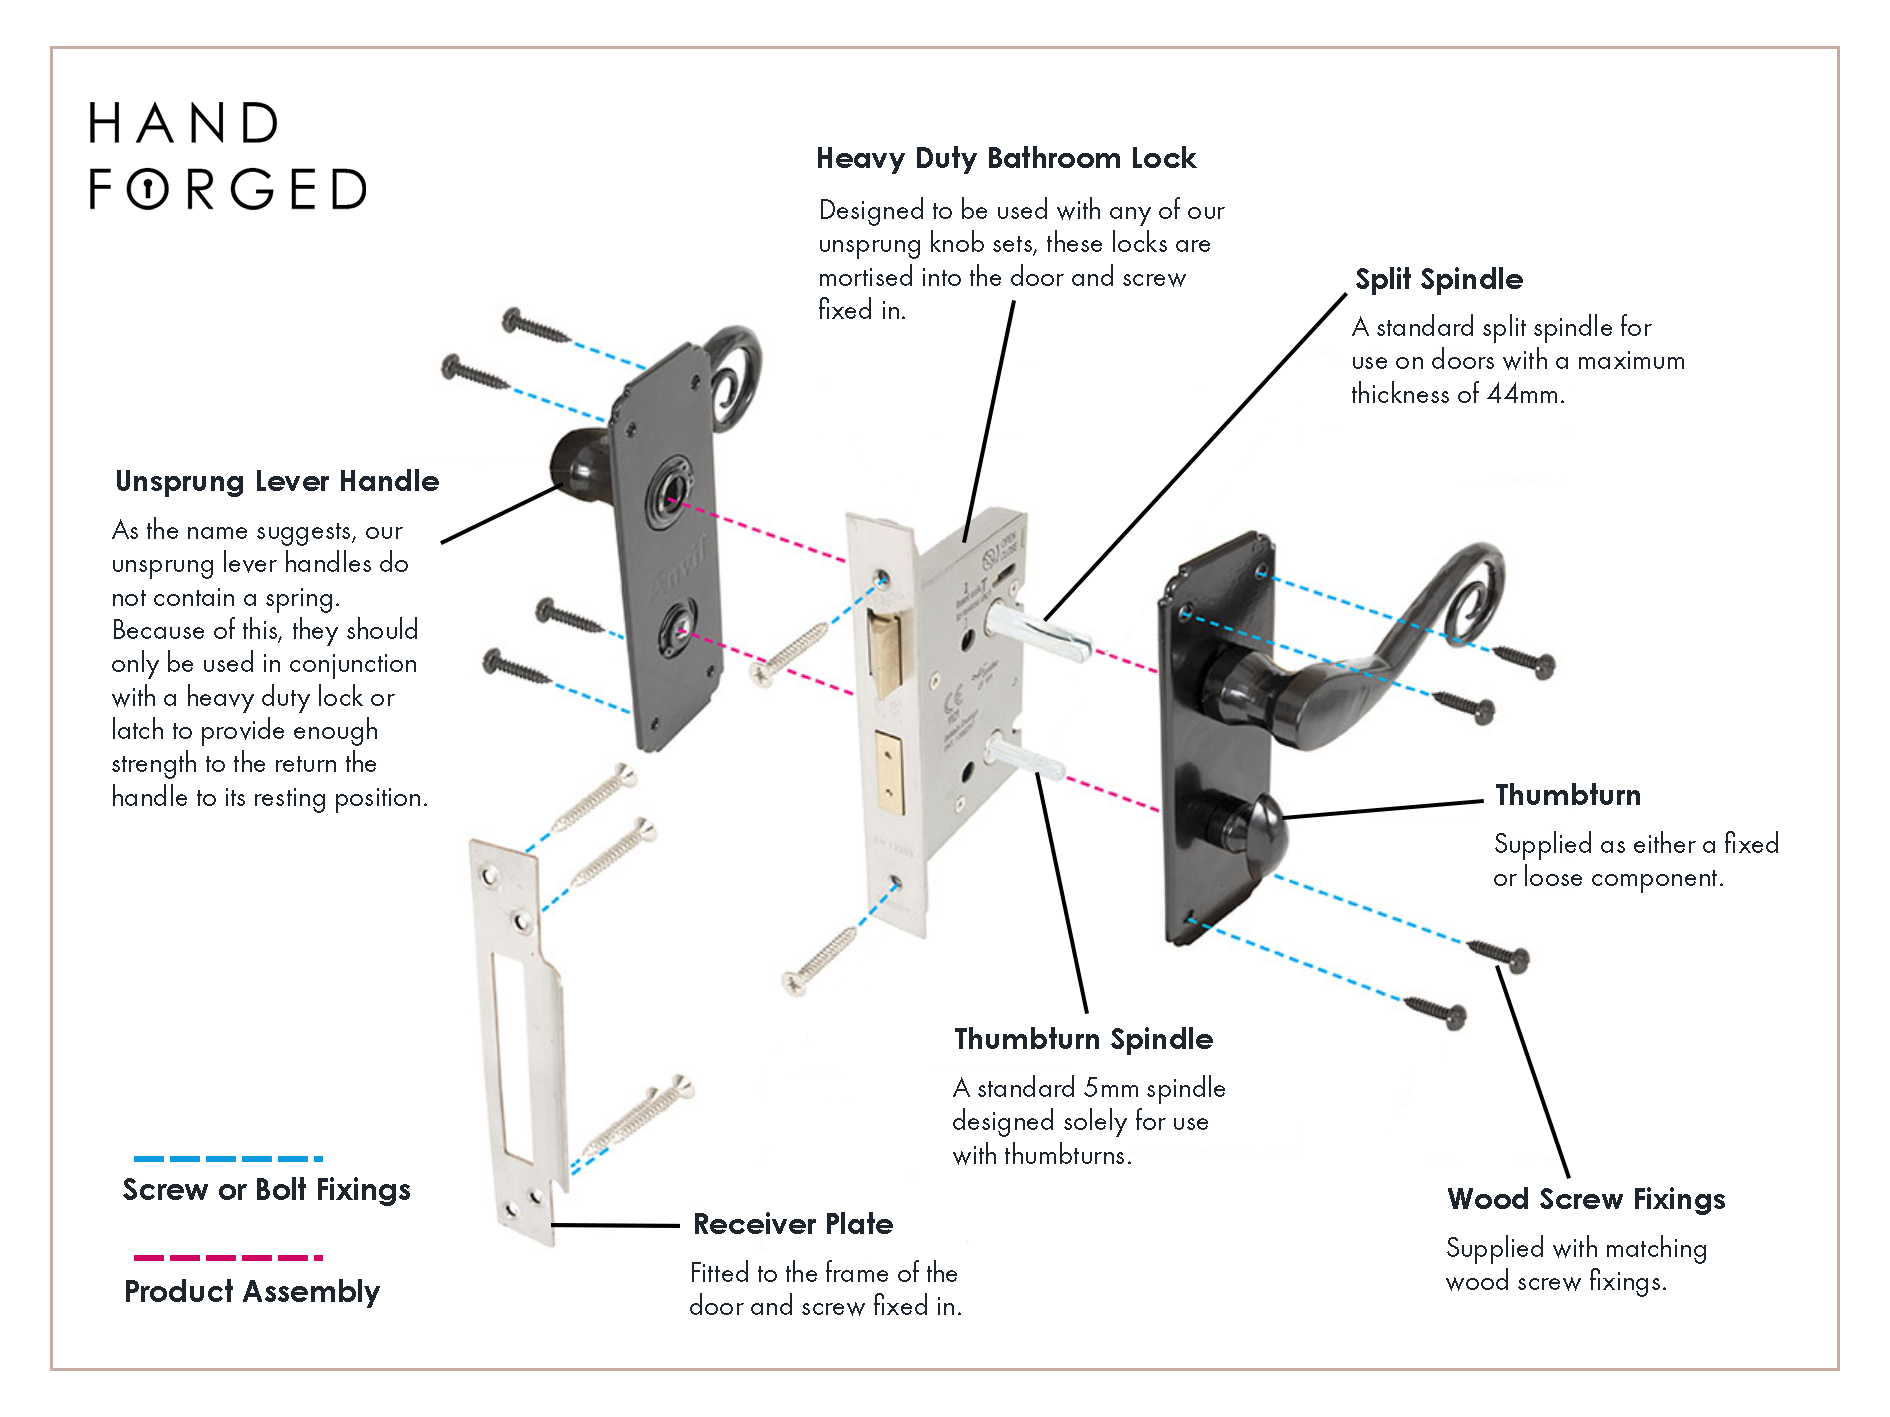 Diagram of a heavy duty bathroom lock and pair of Black Monkeytail lever door handles with text explaining the function of each component.